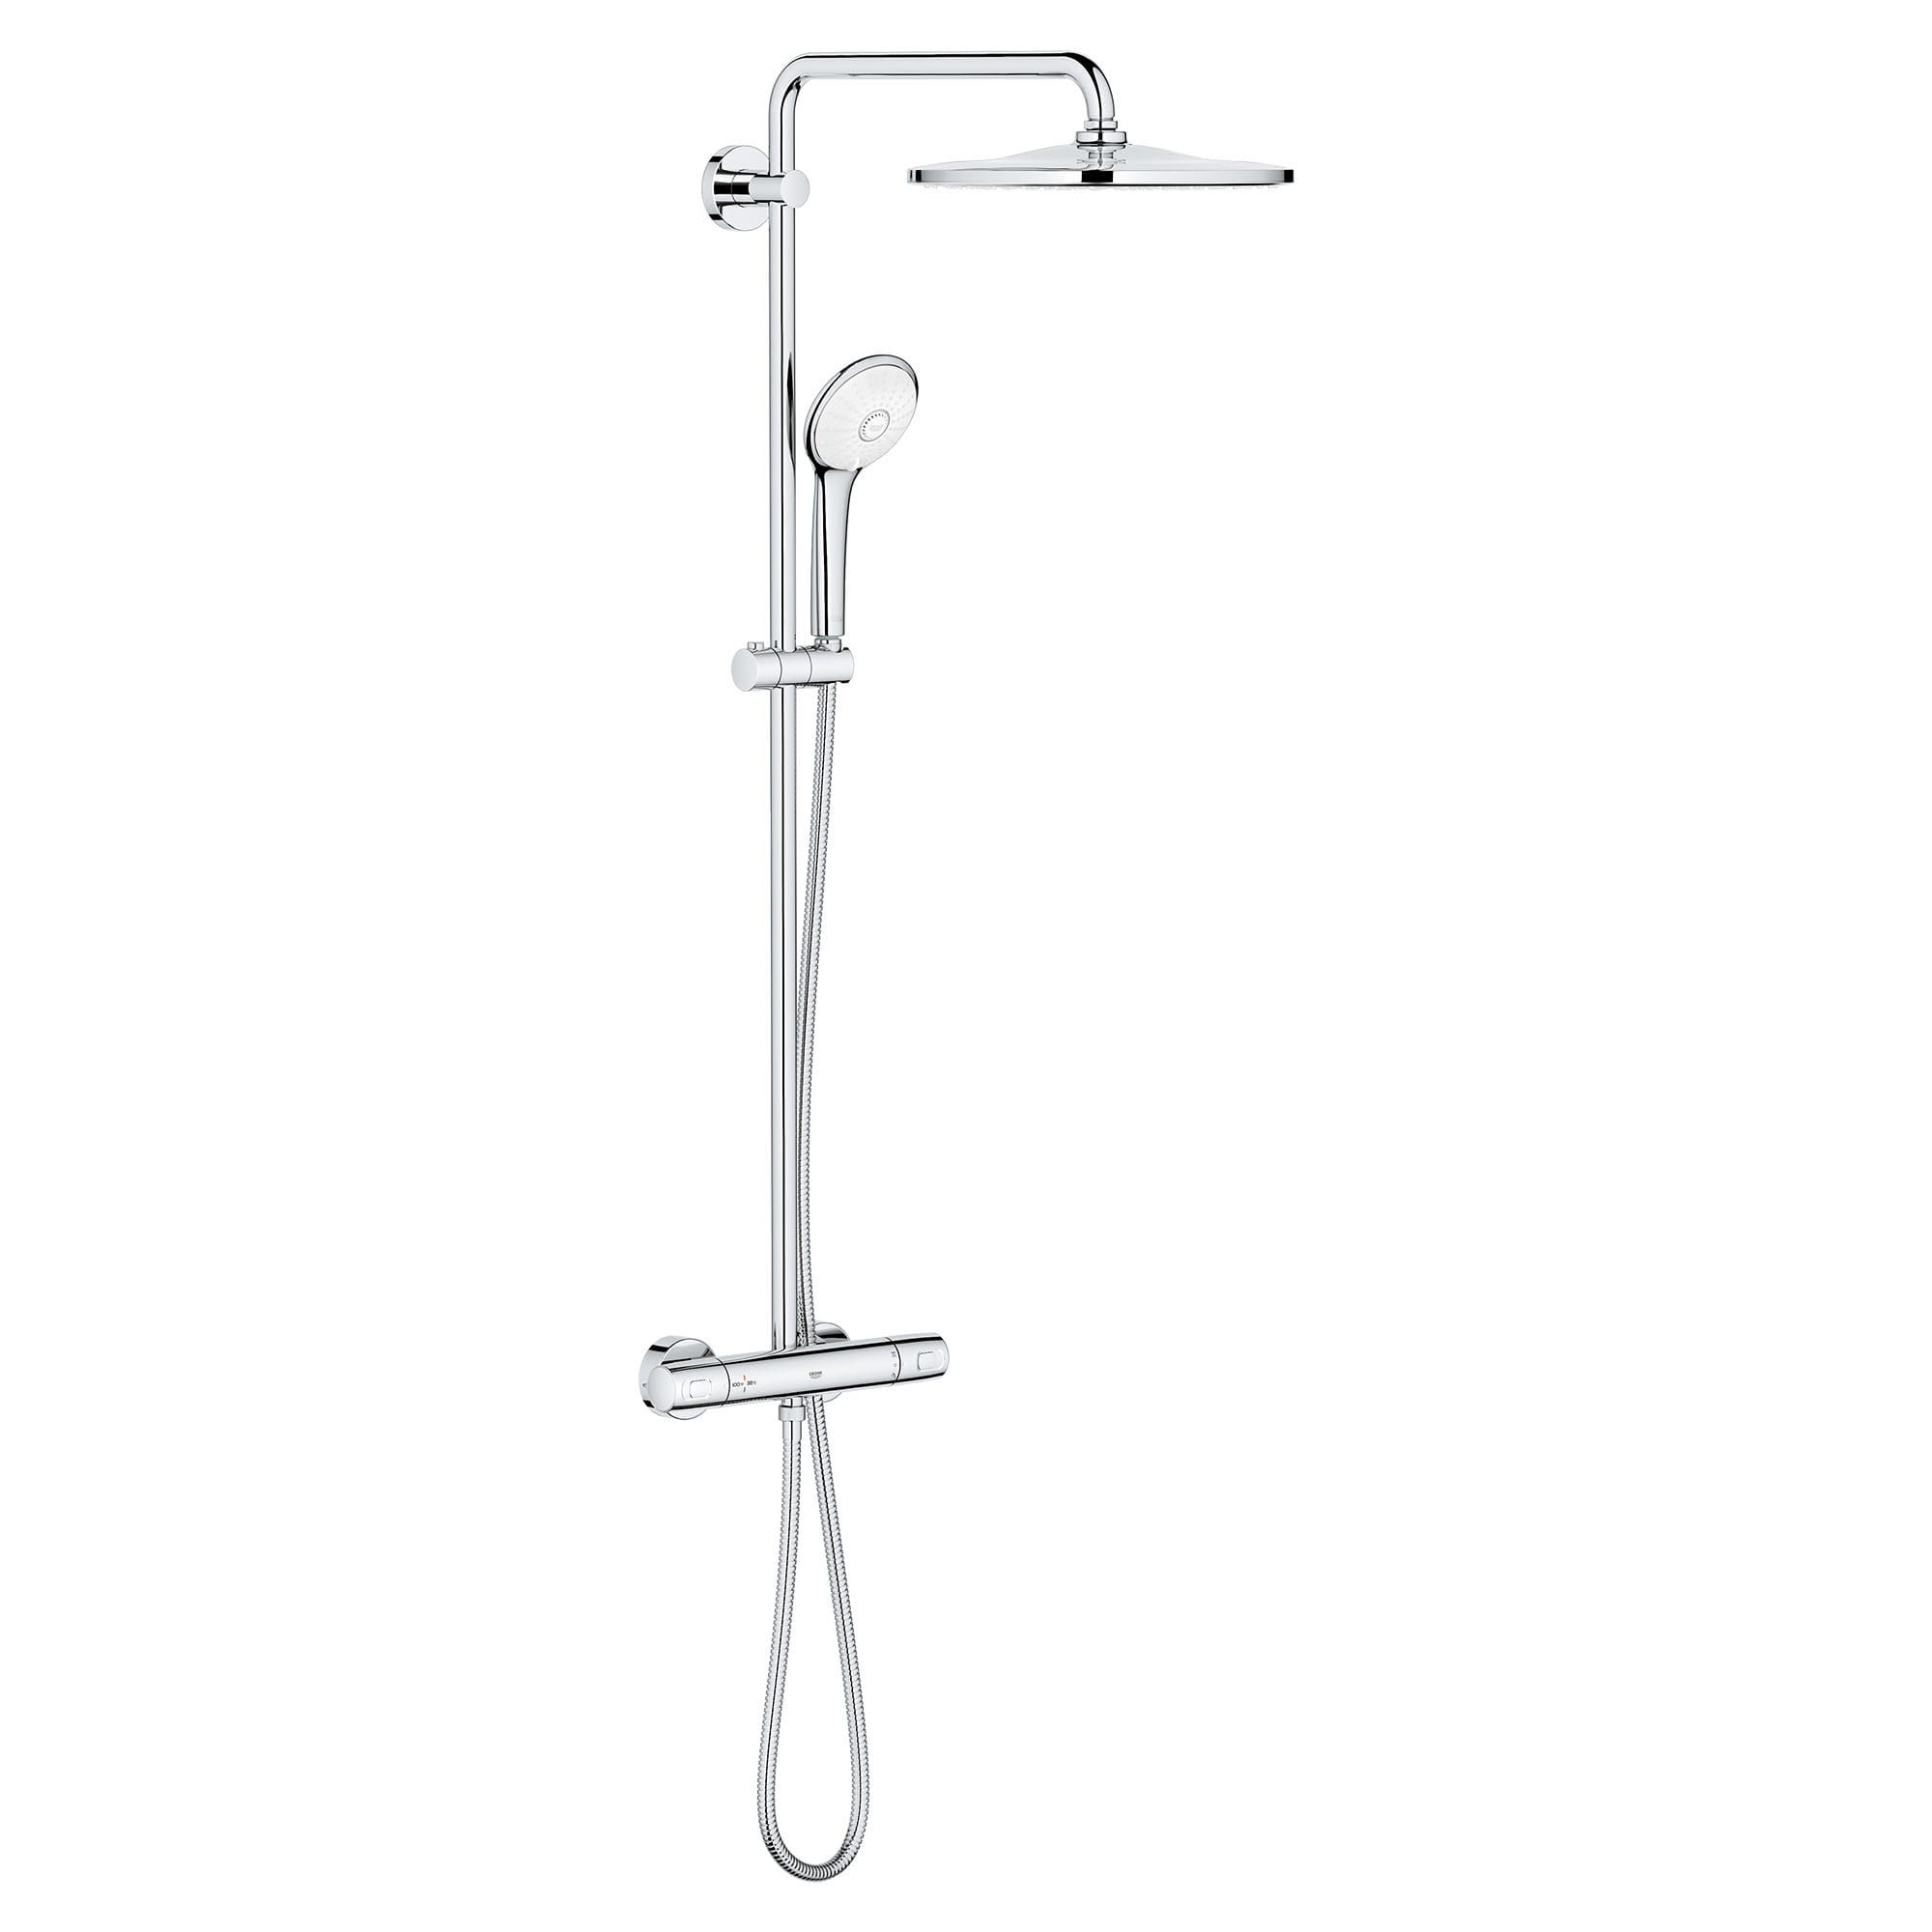 Euphoria 310 CoolTouch Shower System W/Showerhead and Hand Shower In Chrome